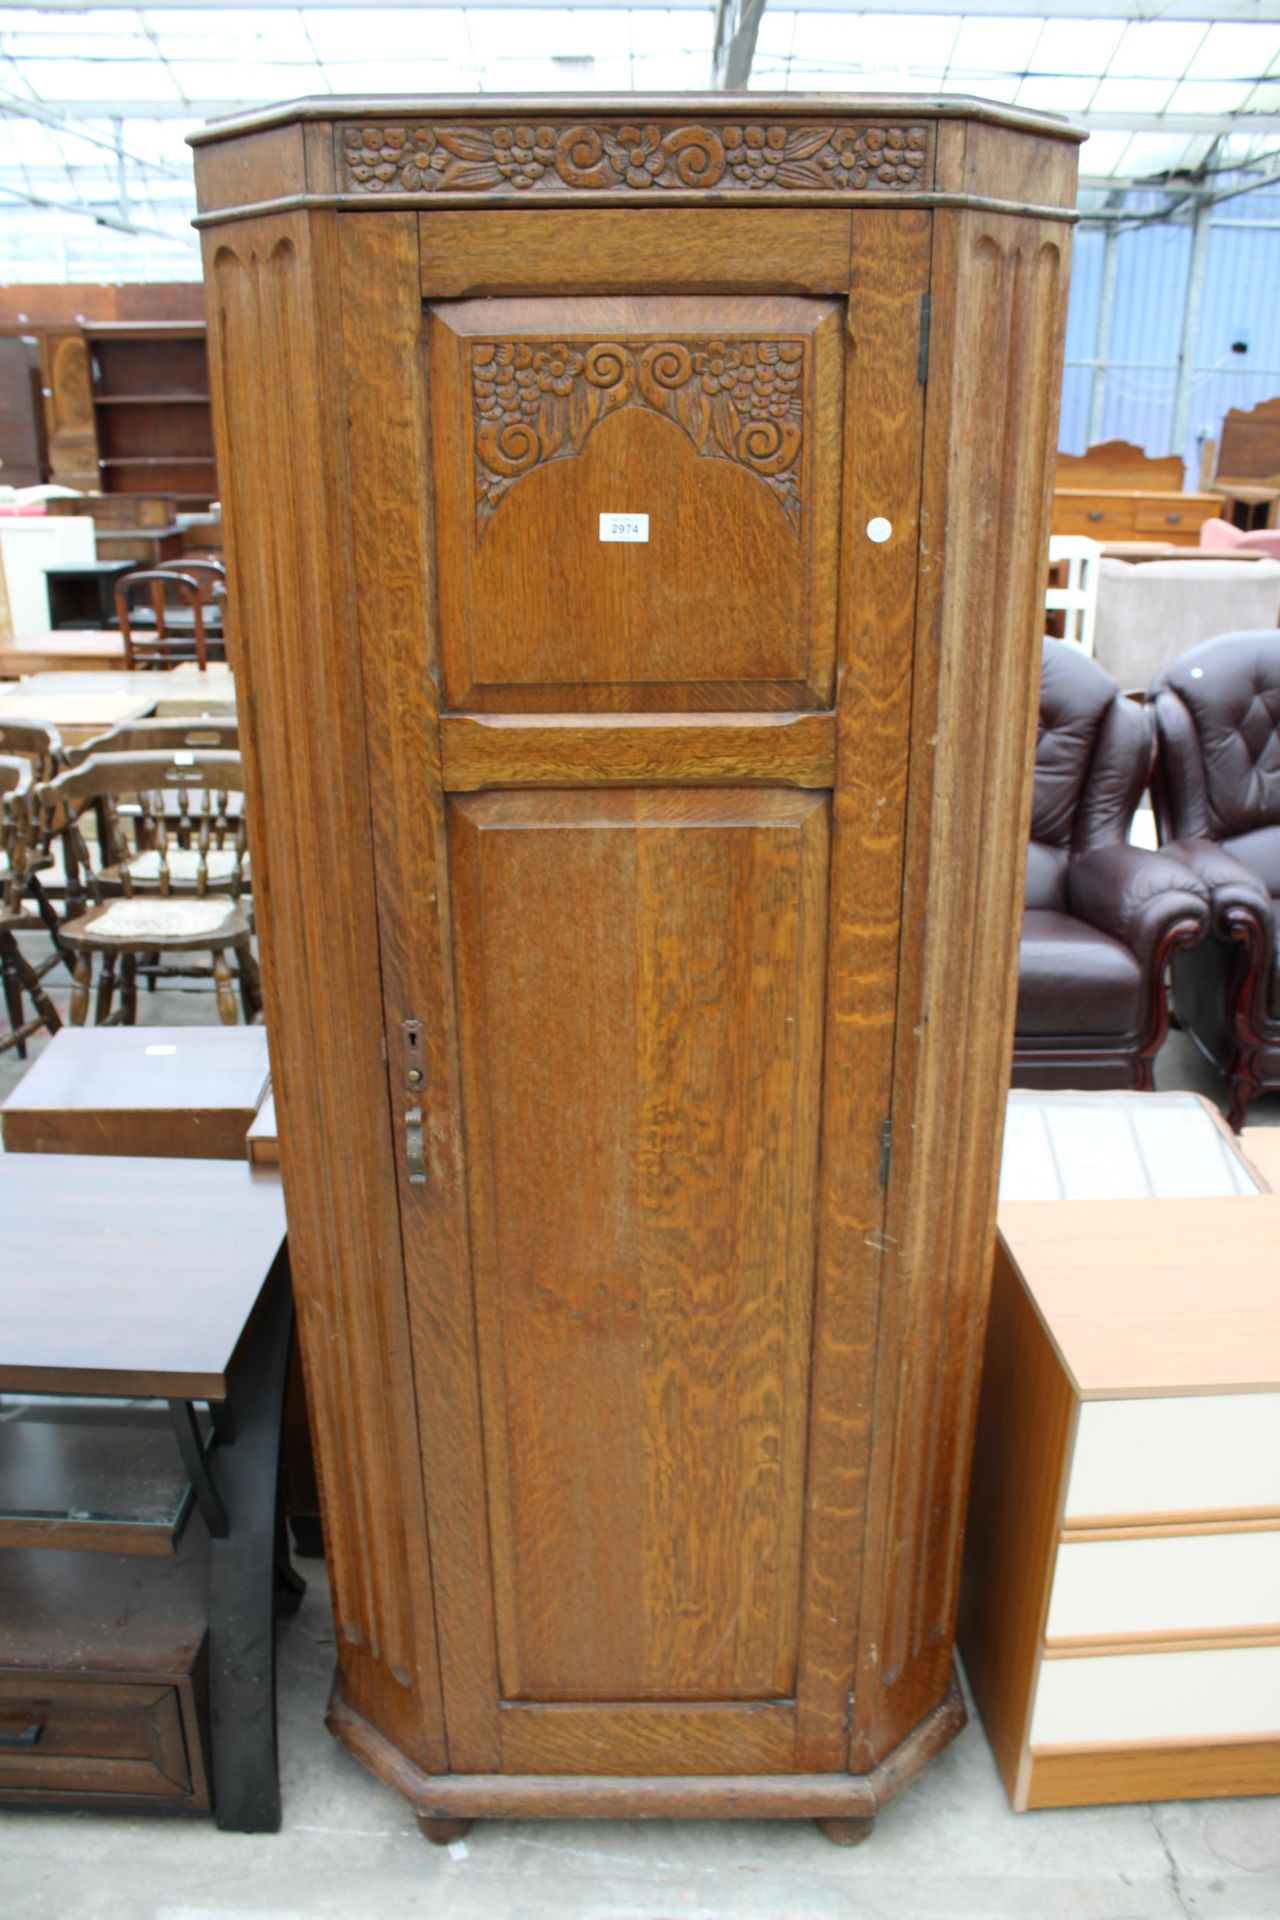 AN EARLY 20TH CENTURY OAK HALL WARDROBE WITH CARVED PANEL DOOR 30" WIDE